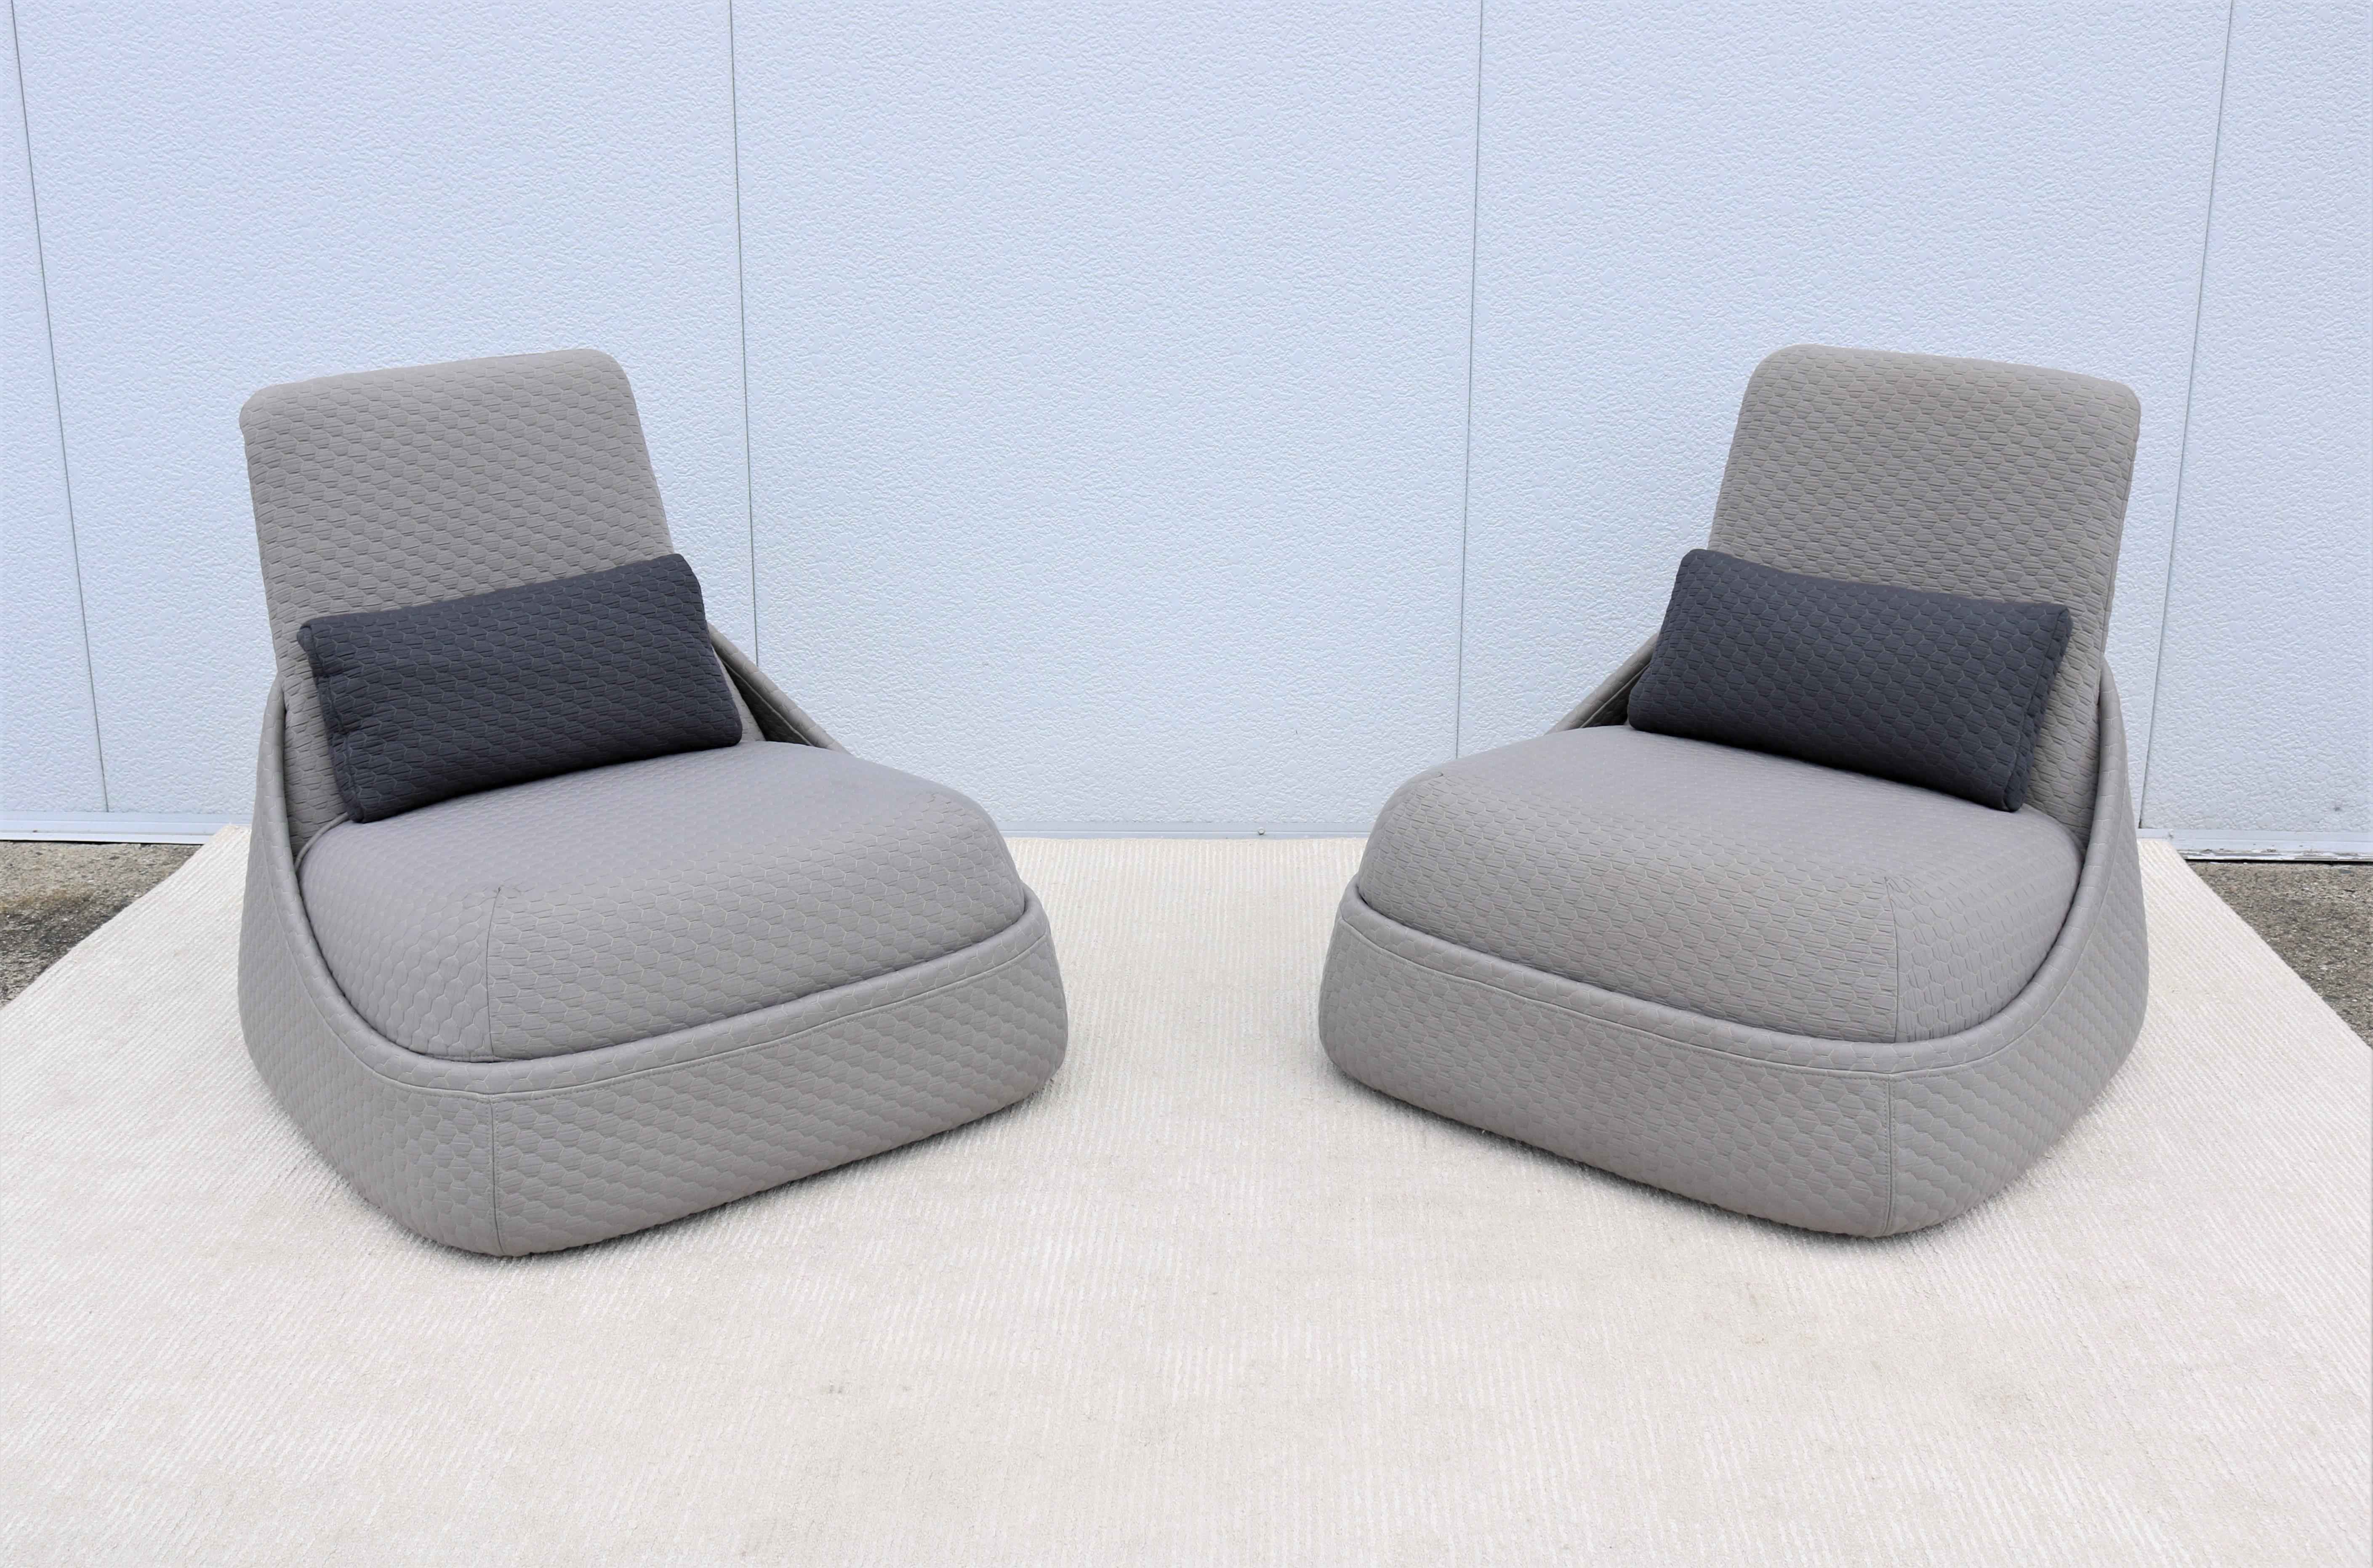 Fabulous pair of Hosu convertible chaise lounge chairs with ottoman and lumbar pillow by Coalesse.
Hosu is a habitat to relax, work, think and read, it encourages spreading out in comfort.
This unique lounge creates a very comforting personal